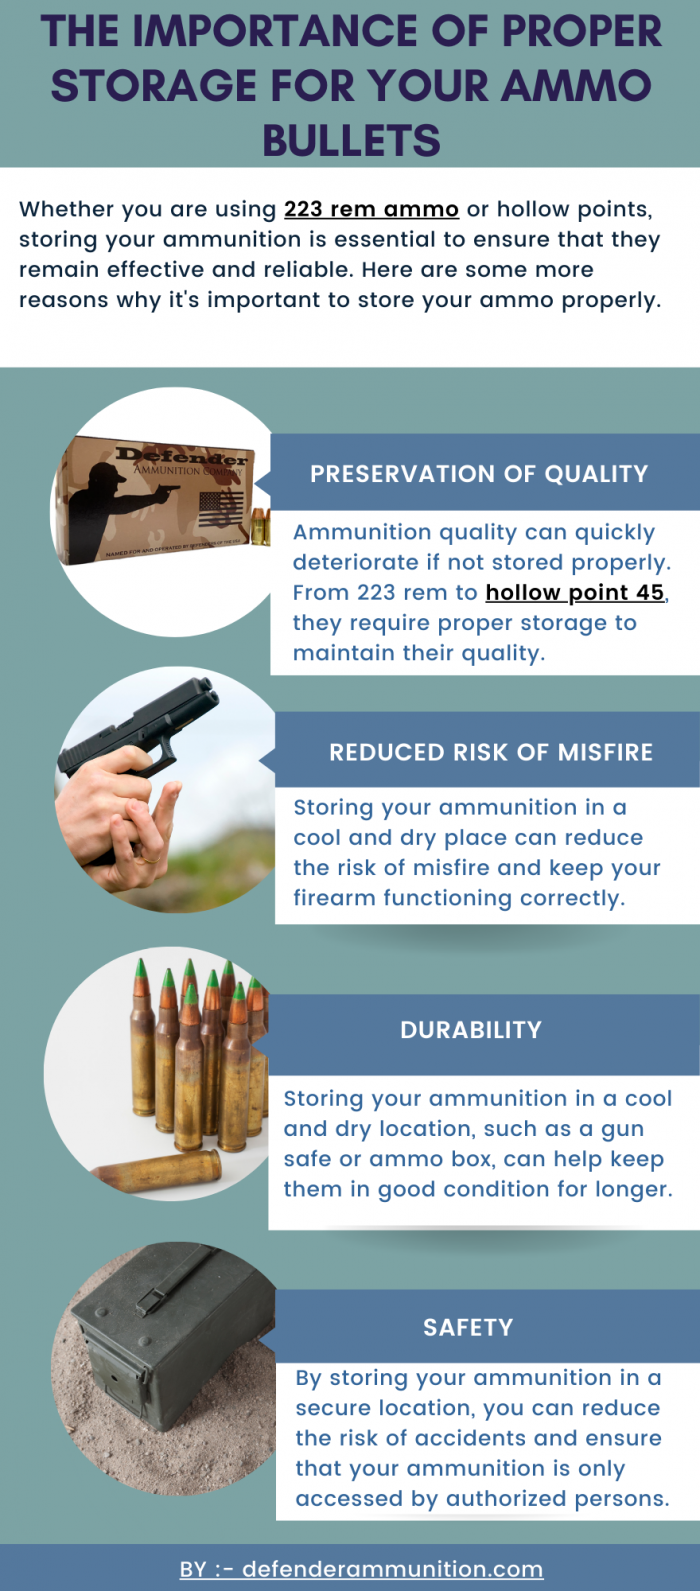 The Importance of Proper Storage for Your Ammo Bullets